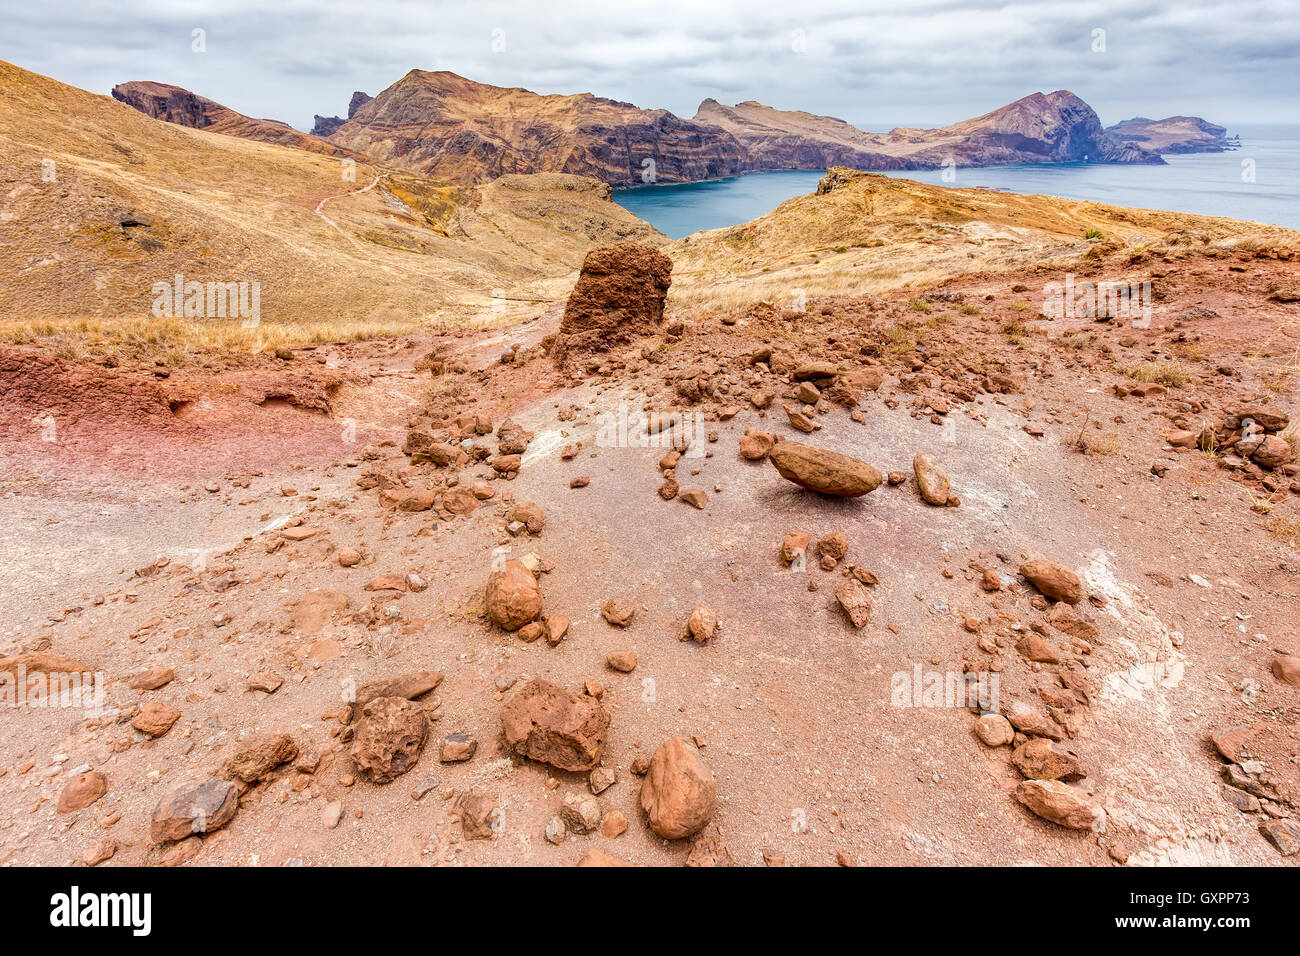 Moonscape lunar landscape with rocks on island Madeira in Portugal Stock Photo